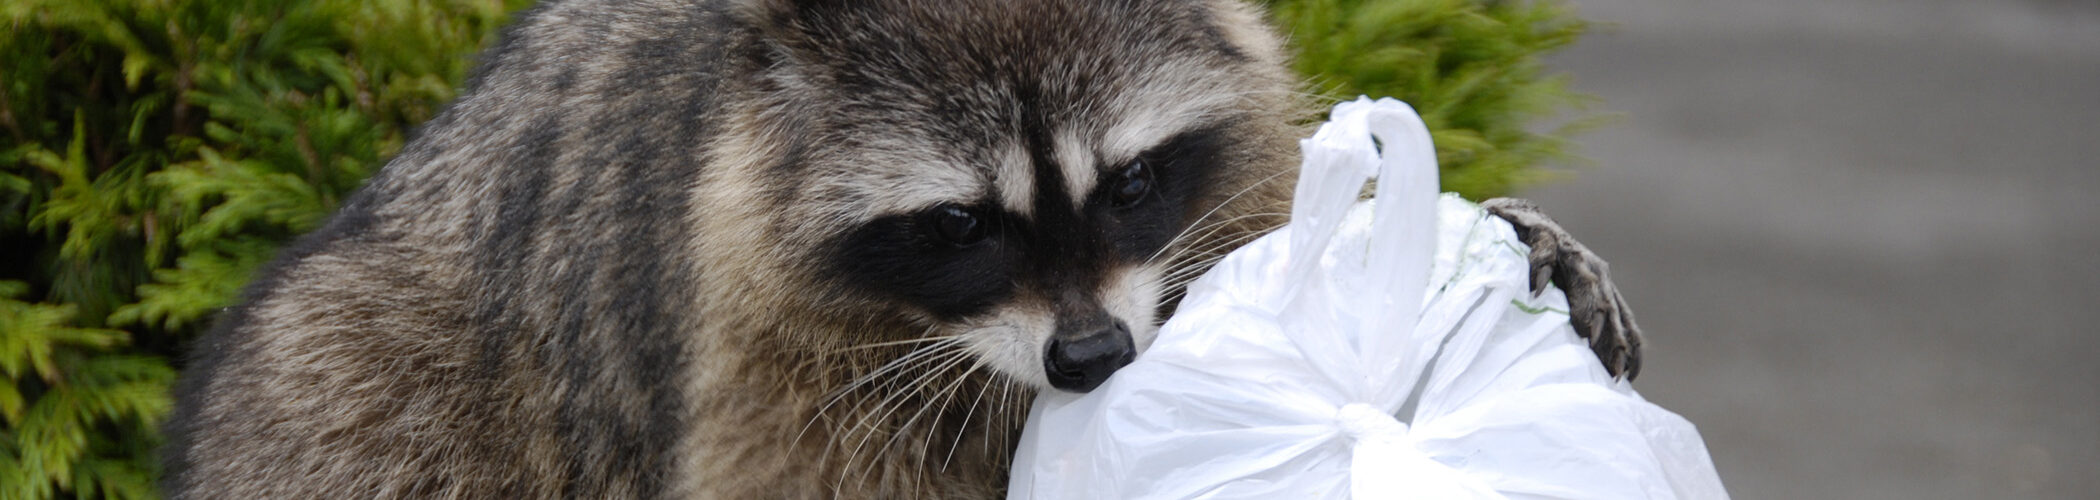 A raccoon, considered a scavenger, eats from the garbage can